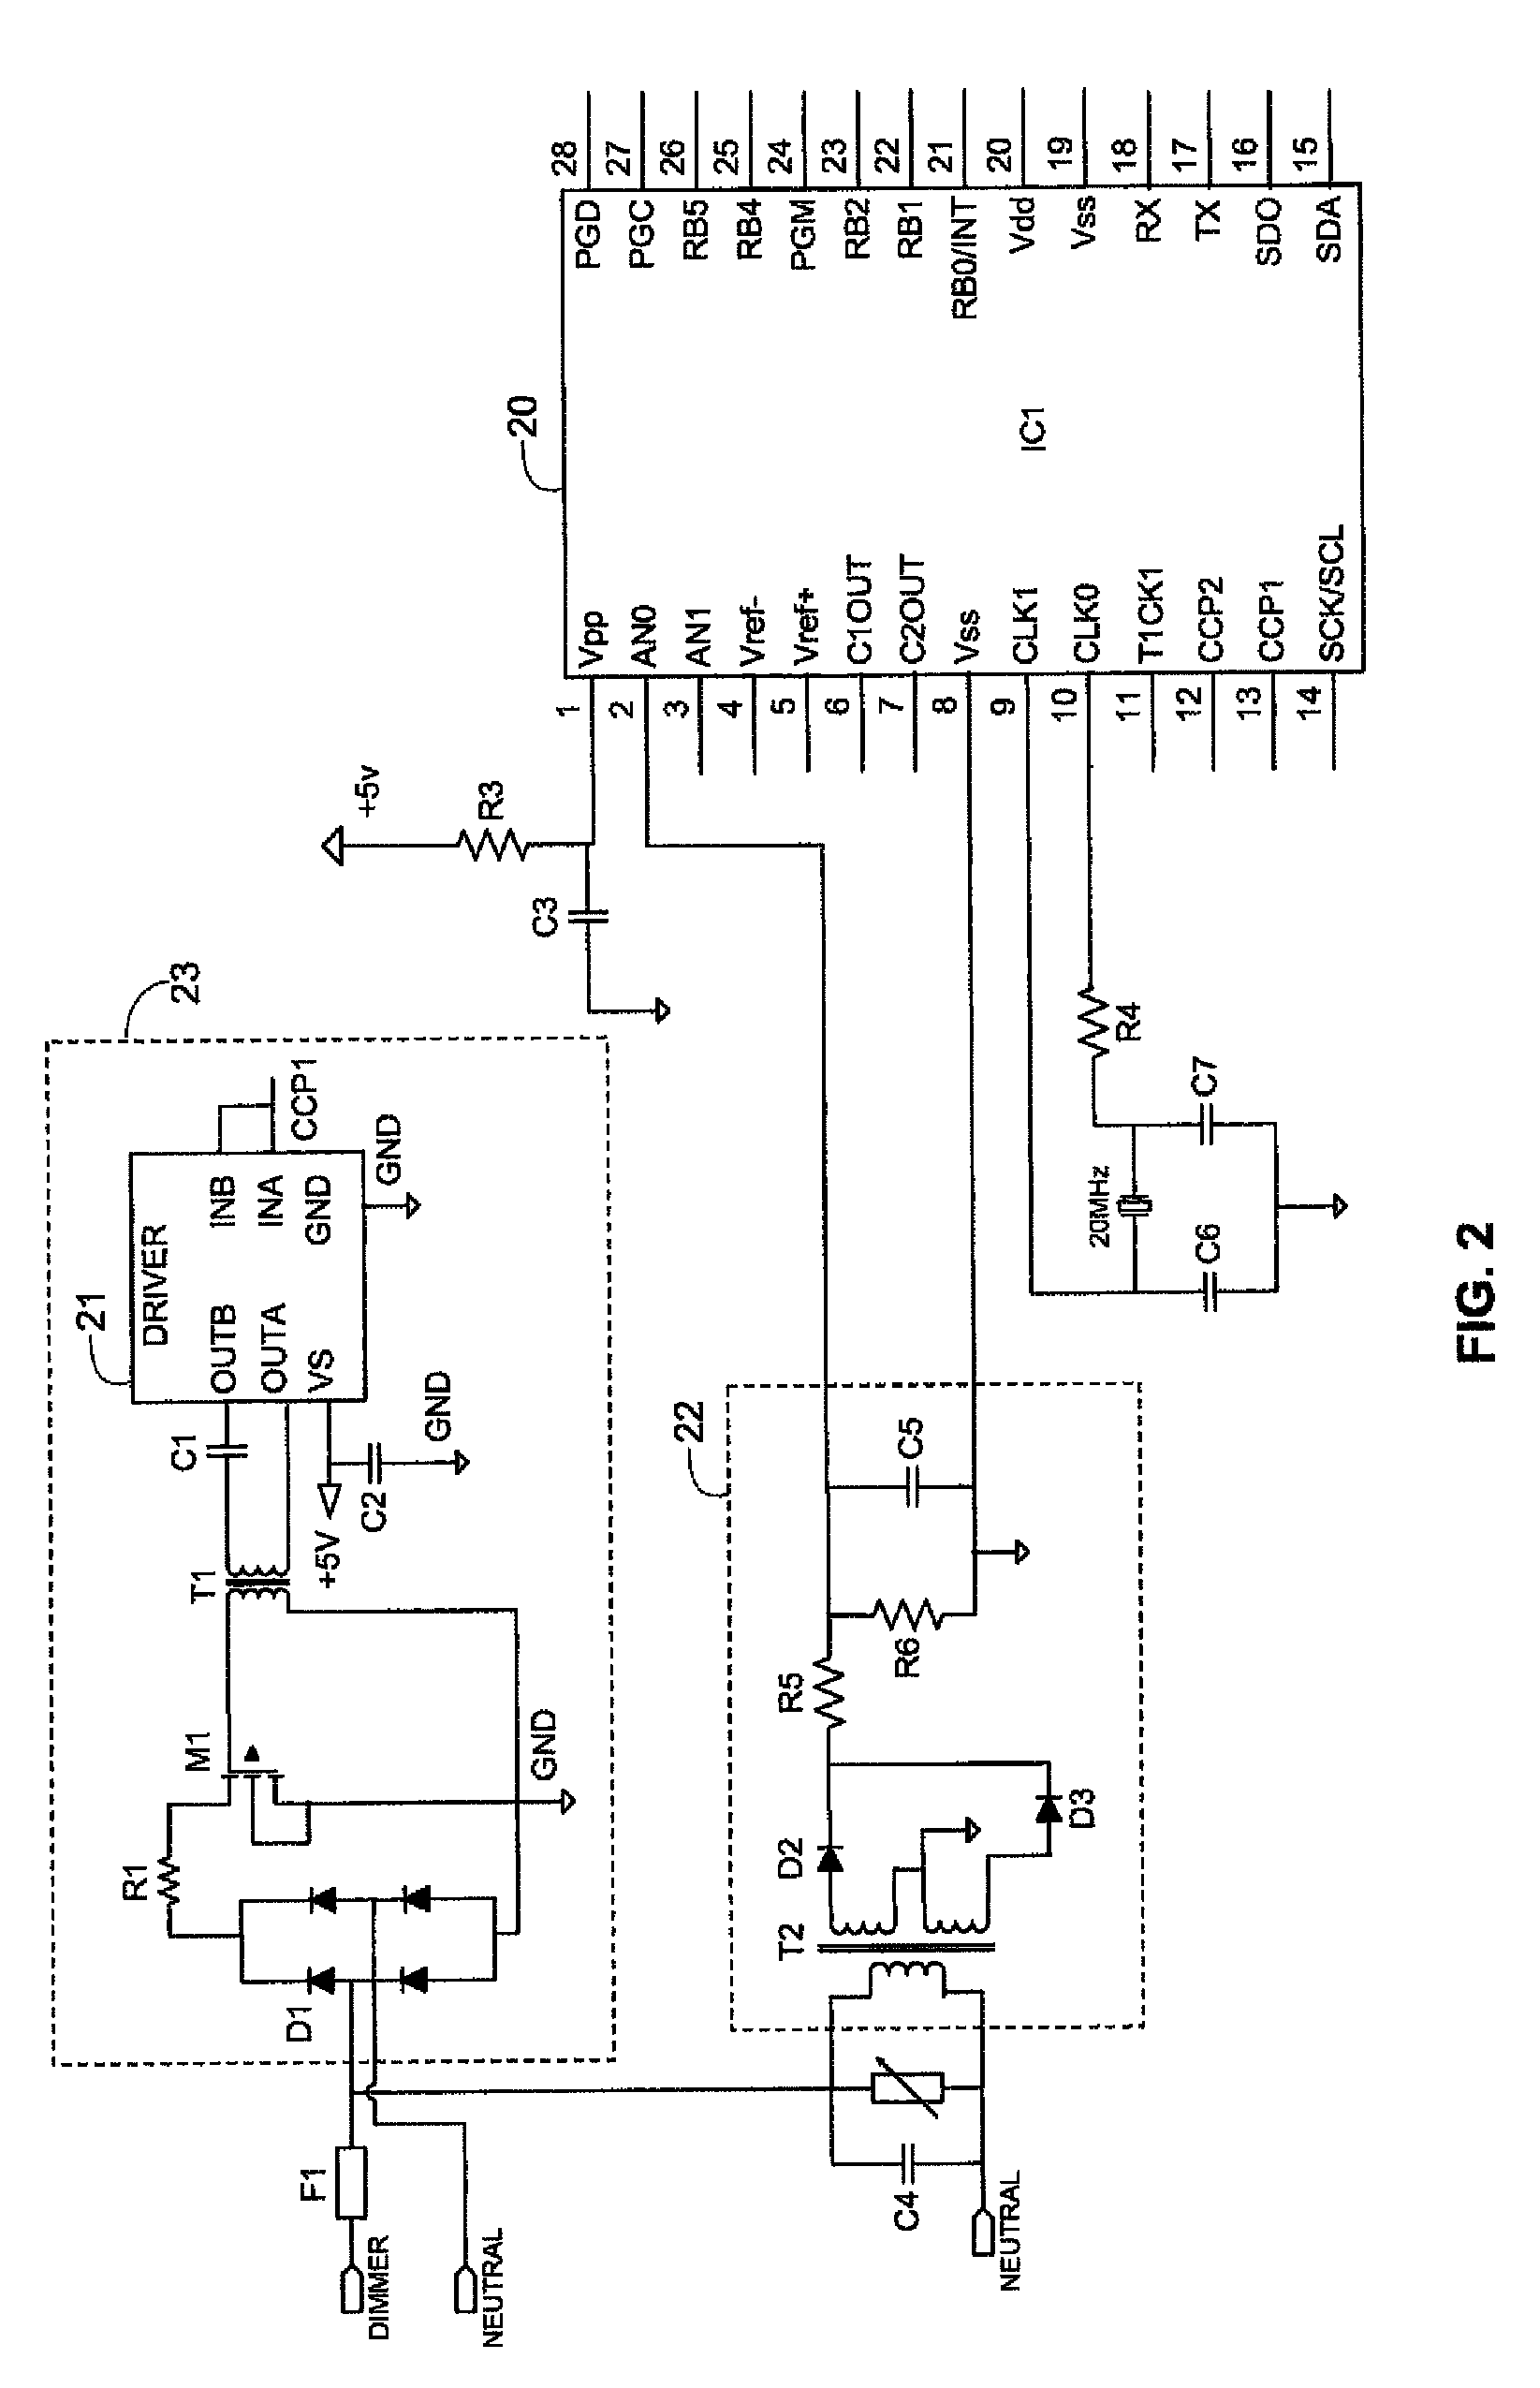 Controller and method for controlling an intensity of a light emitting diode (LED) using a conventional AC dimmer